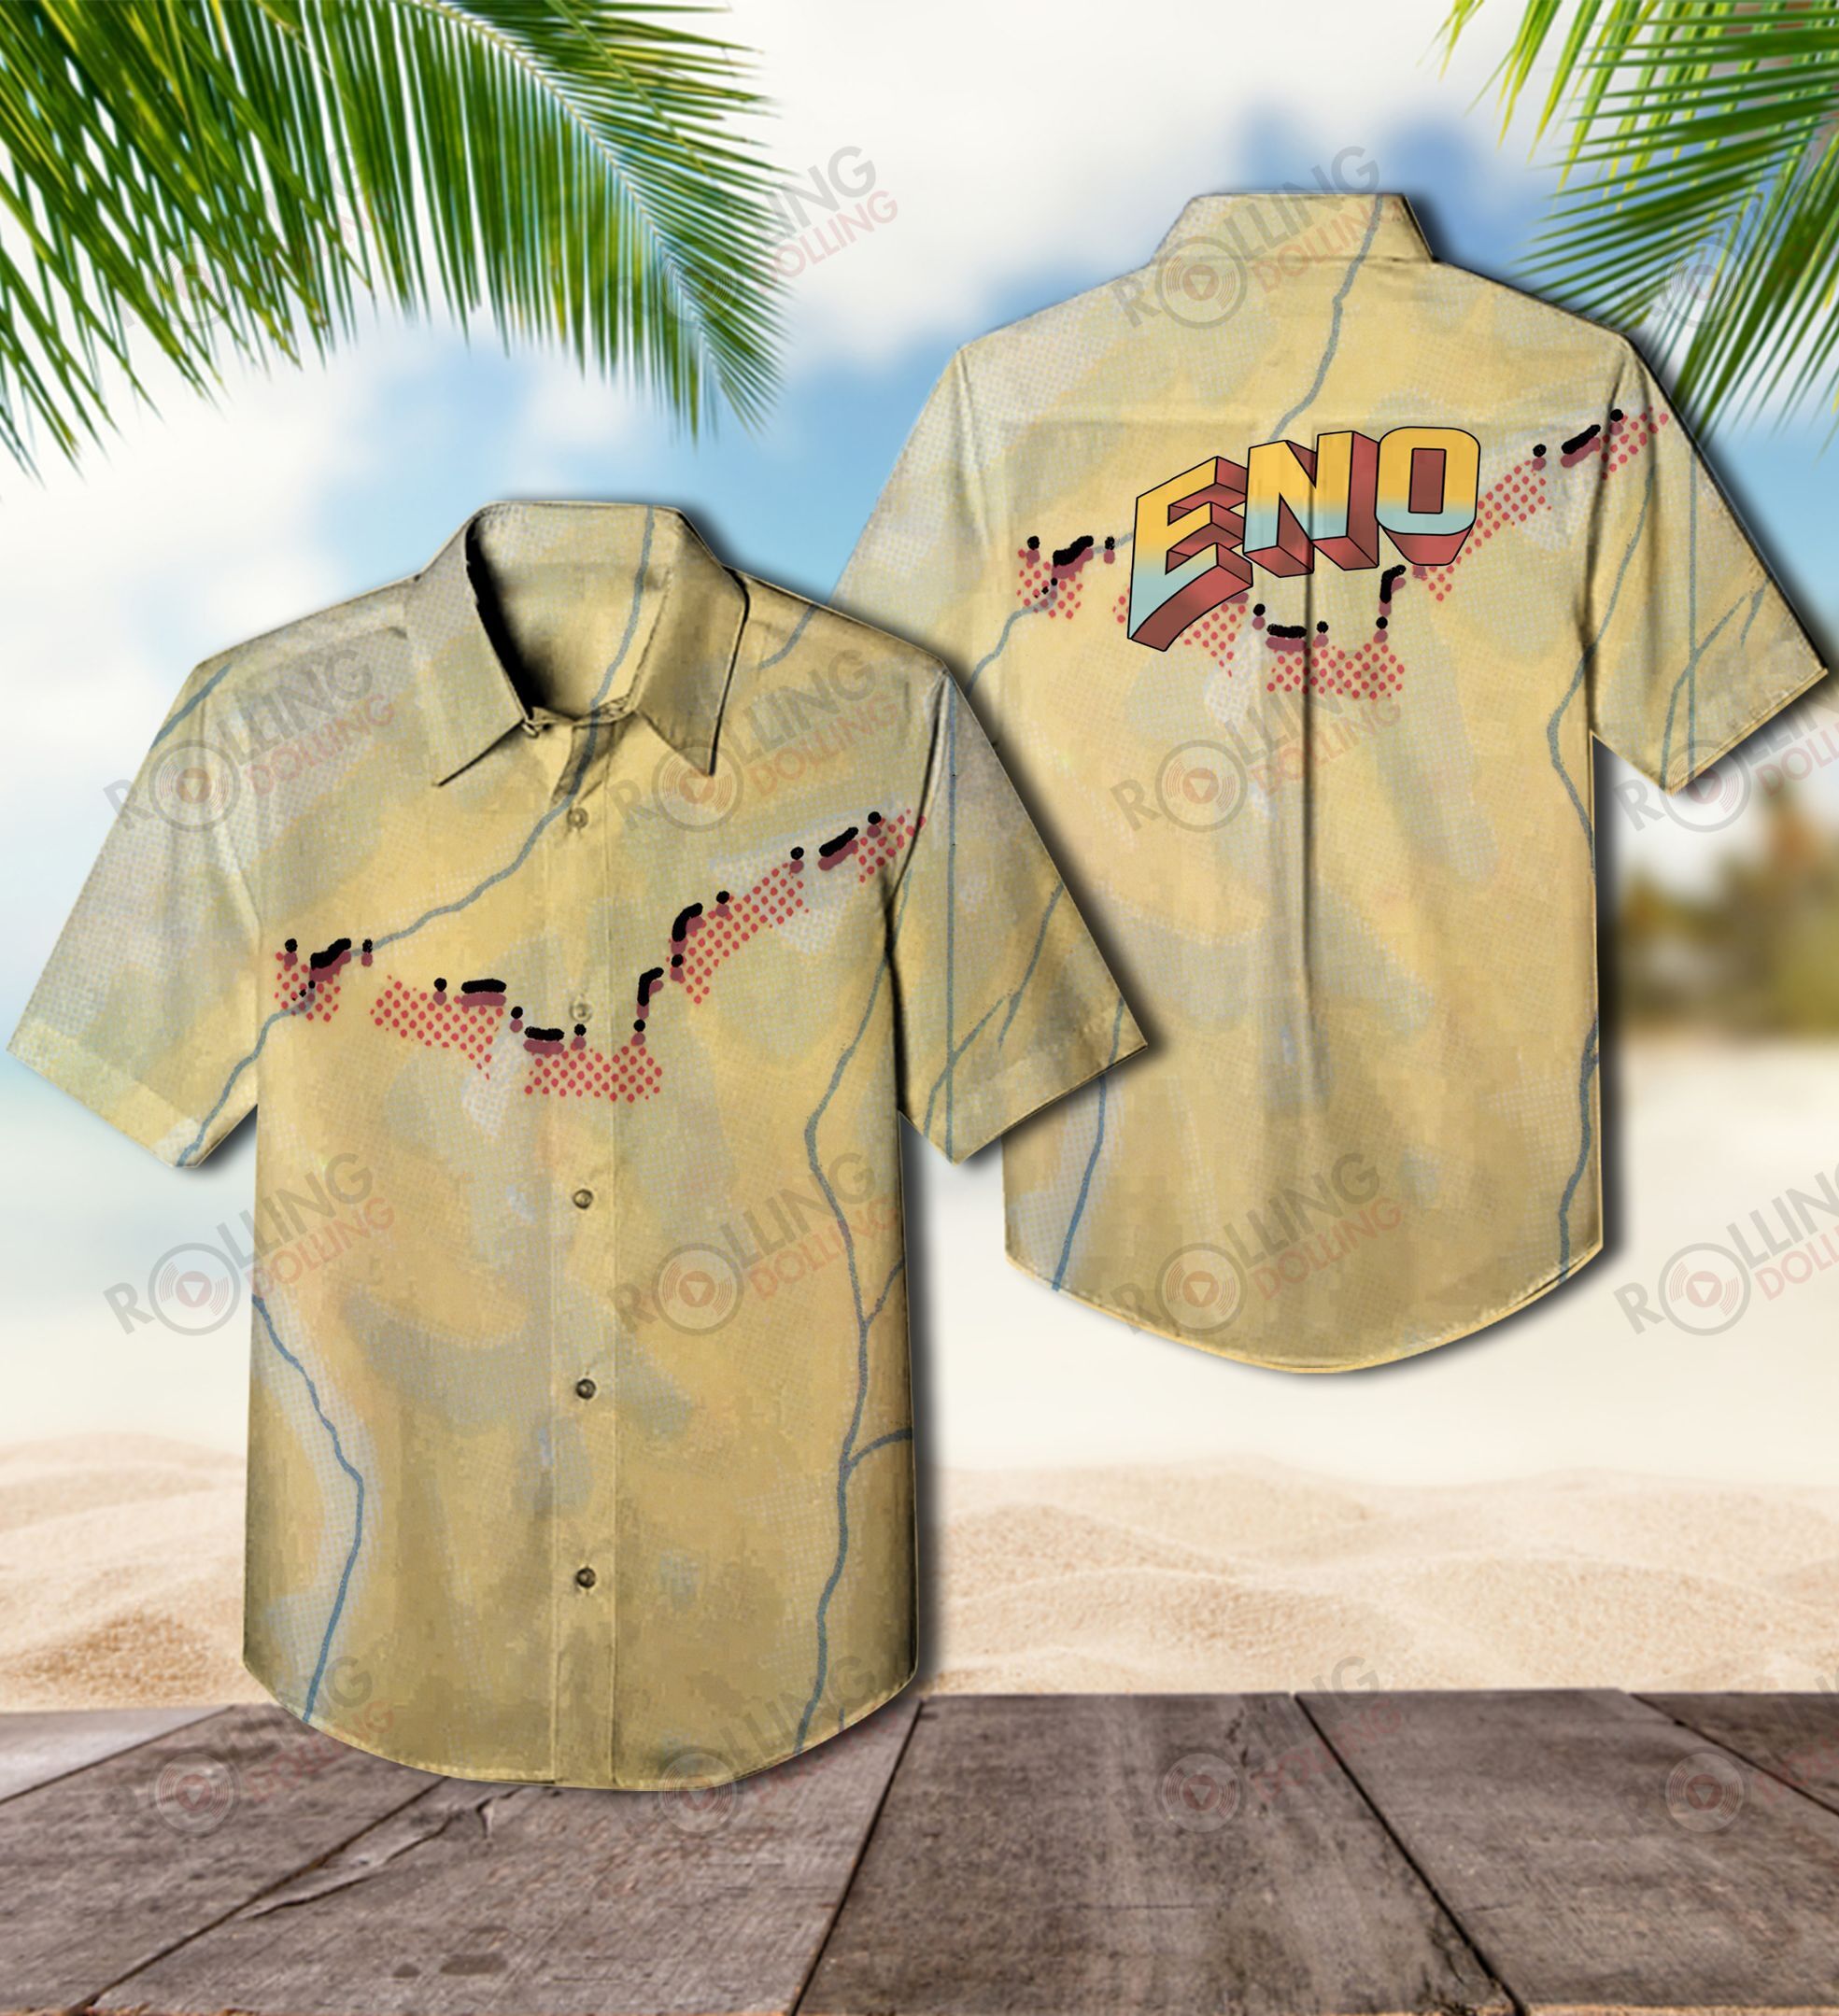 We have compiled a list of some of the best Hawaiian shirt that are available 51